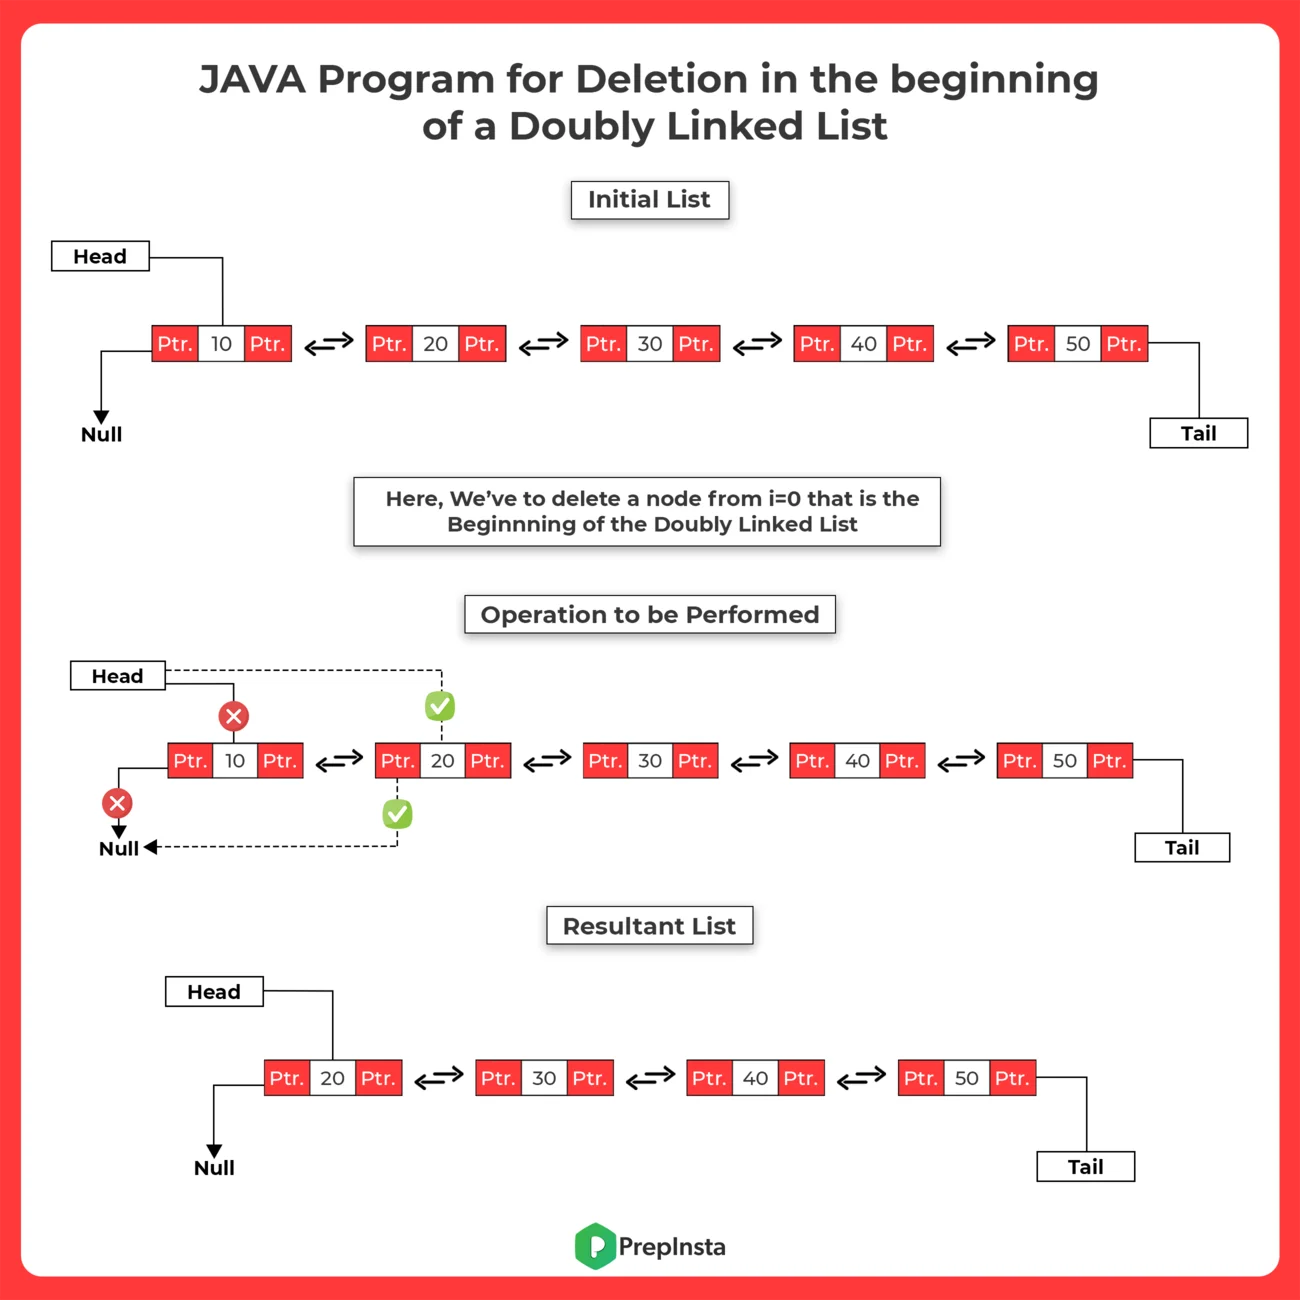 JAVA Program for Deletion from Beginning in a Doubly Linked List